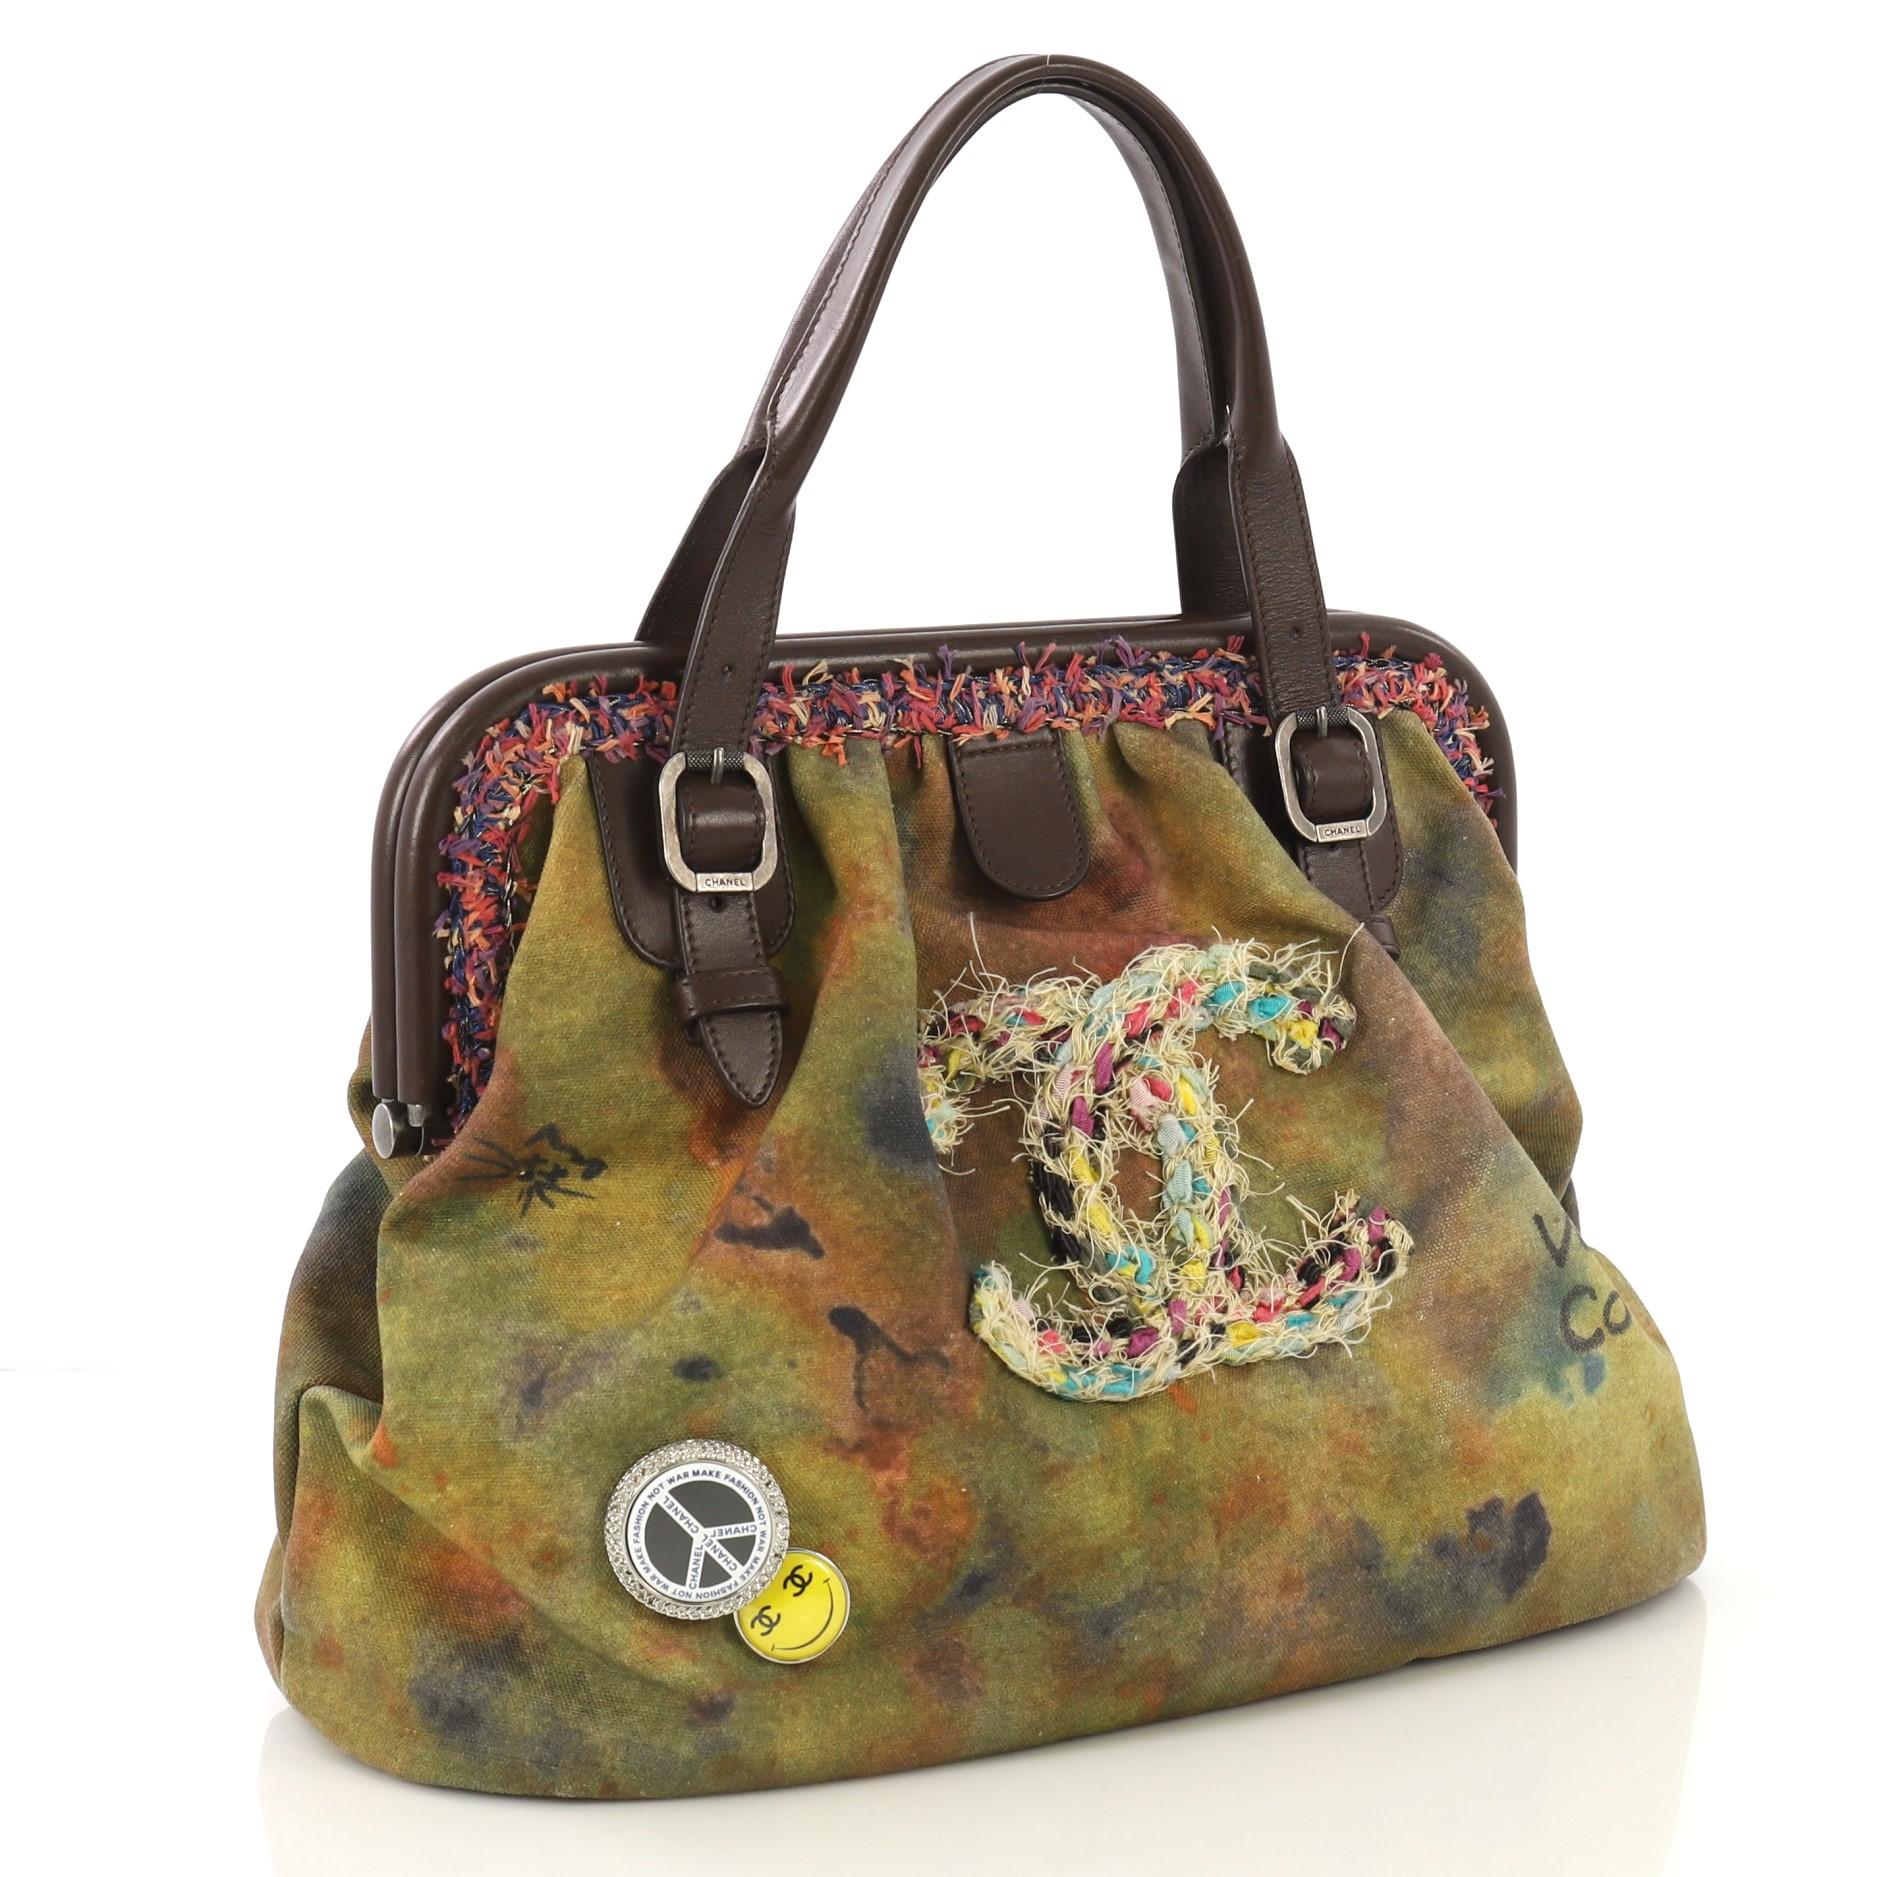 This Chanel On The Pavements Graffiti Bowling Bag Canvas, crafted from khaki washed canvas, features dual leather top handle with buckle details, hand-written graffiti and spray-painted design, CC fabric patch logo in boucle tweed, decorative pins,